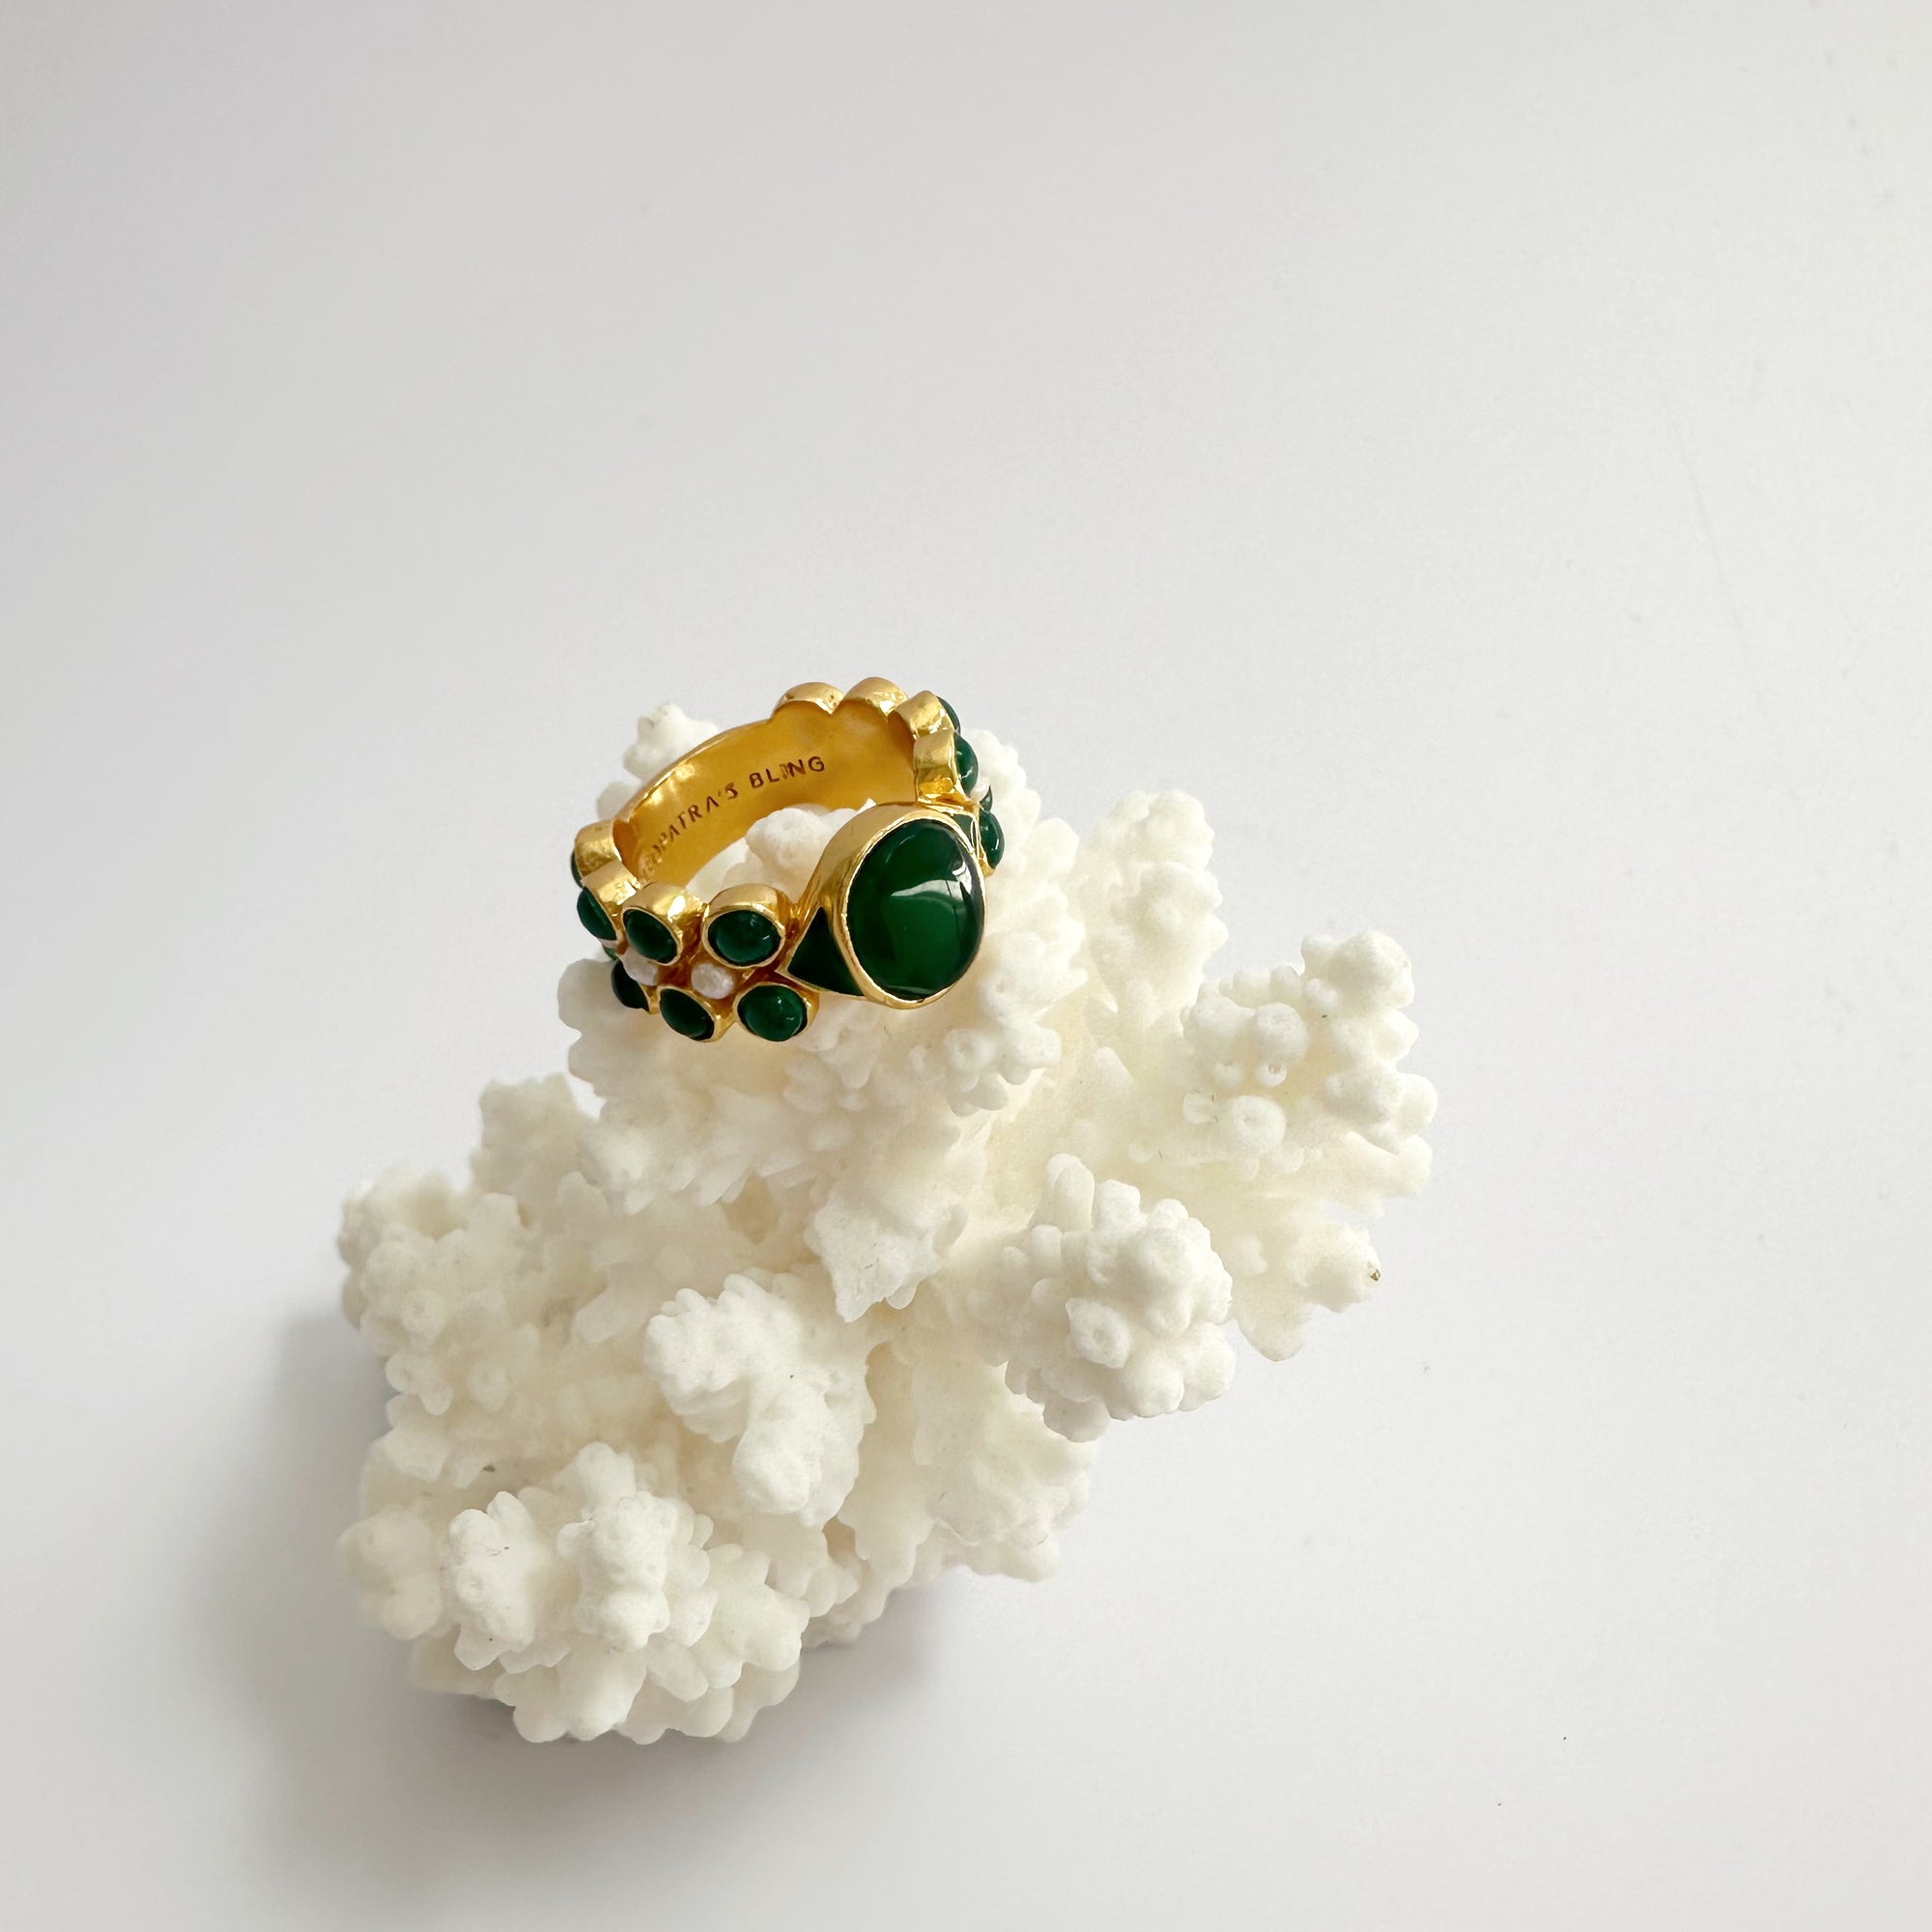 CLEOPATRA'S BLING JATAMANSI RING WITH AGATE AND FRESHWATER PEARL